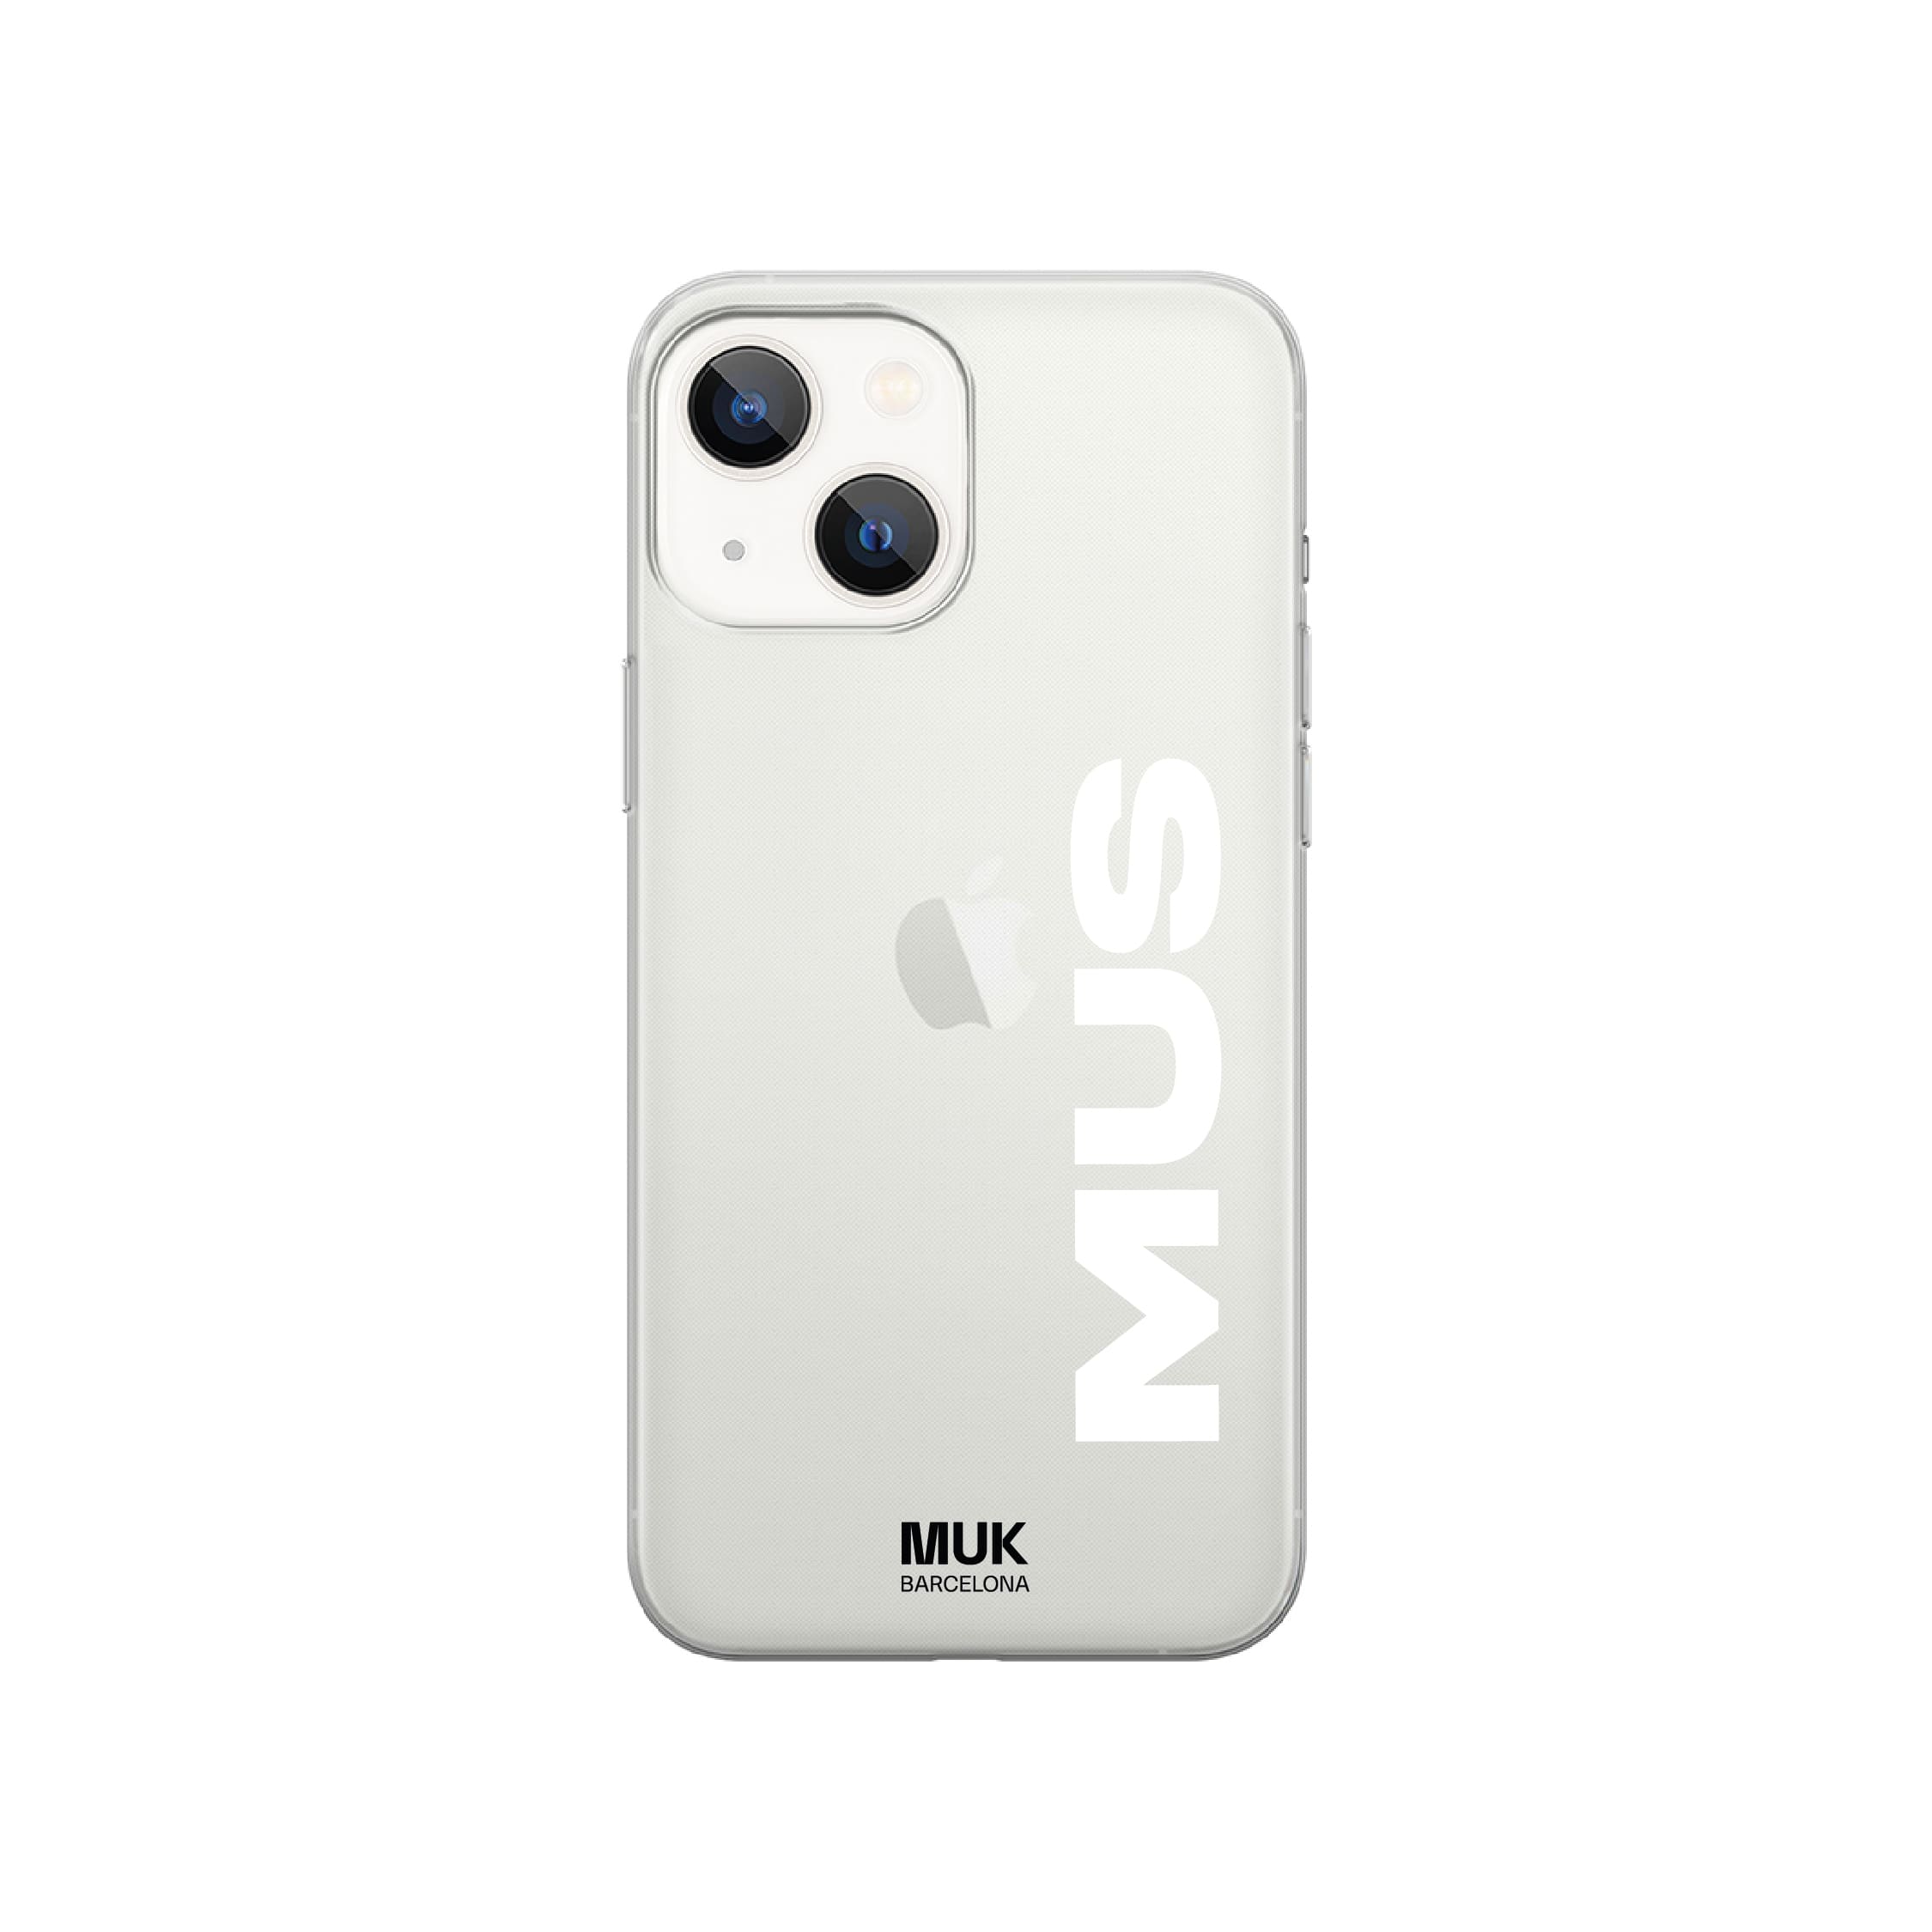 Personalized clear Phone Case with a maximum of 3 initials in 12 colors.
